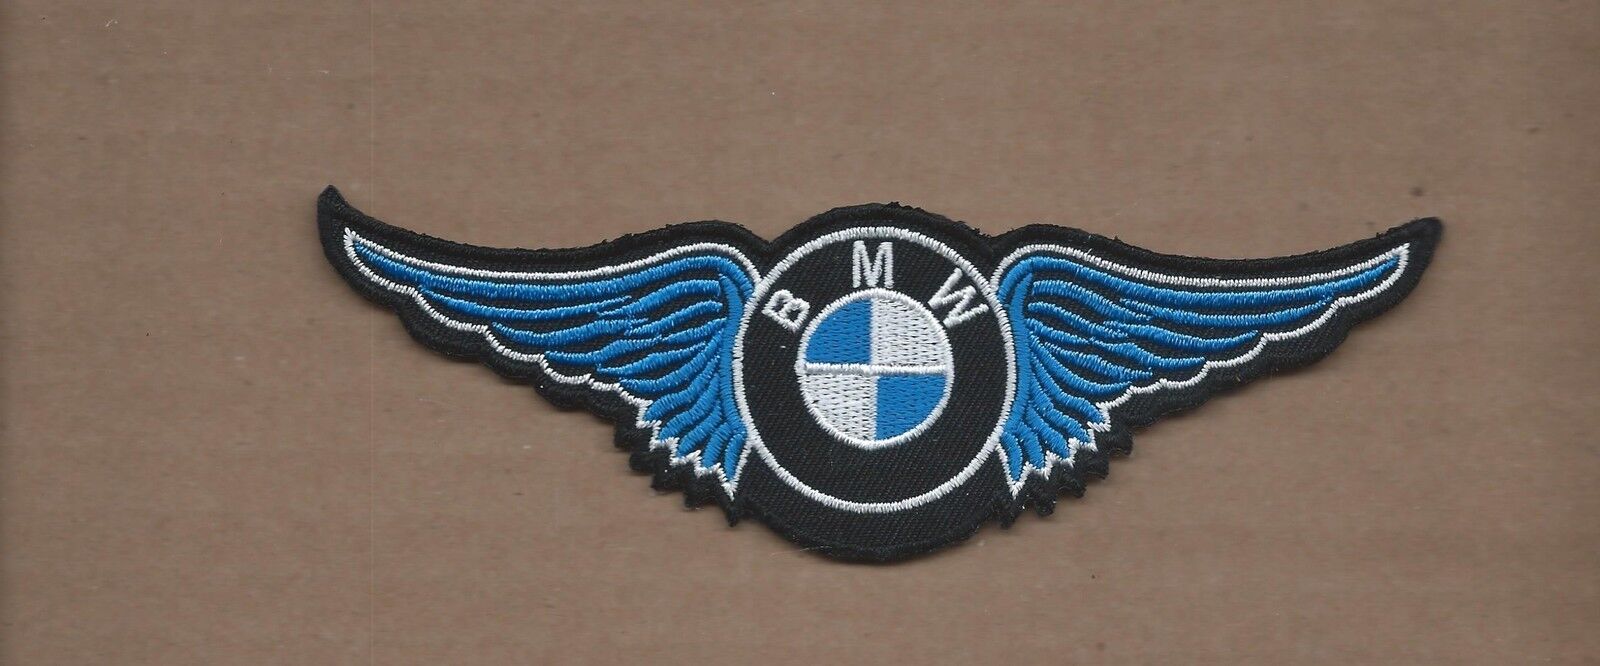 NEW 1 7/8 X 6 INCH BMW BLUE WINGS IRON ON PATCH 